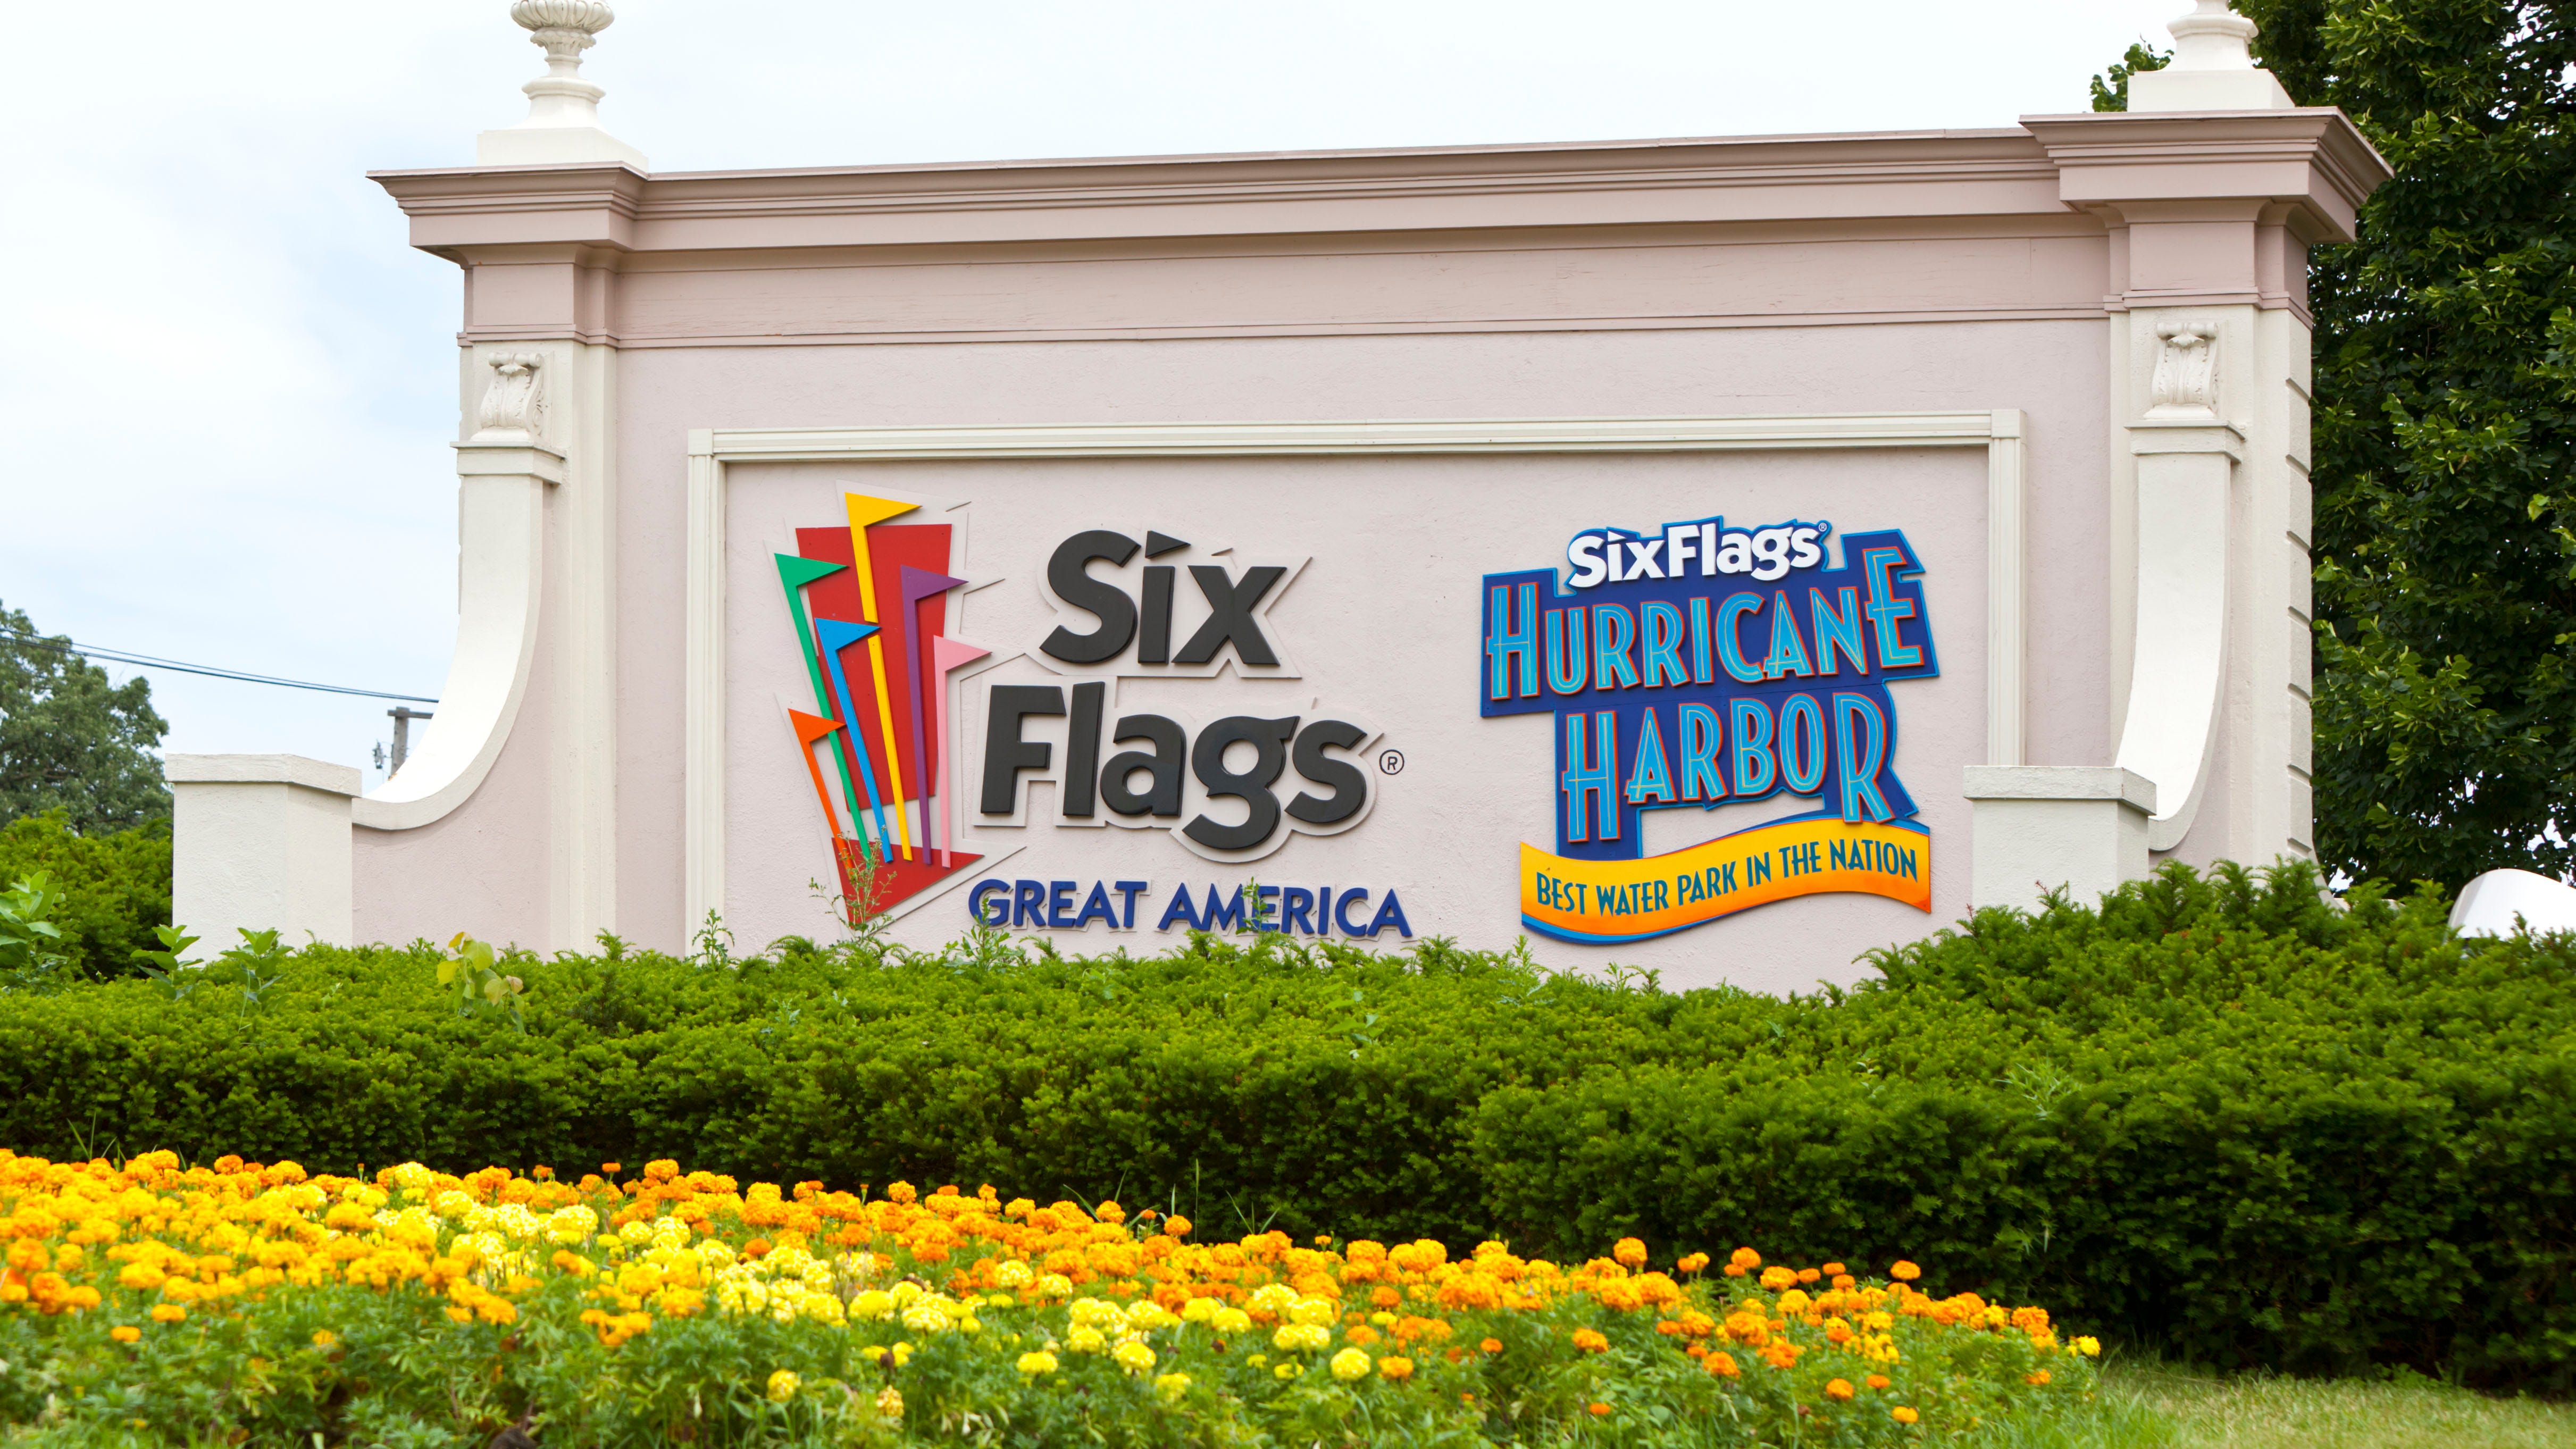 FOX NEWS: Six Flags closing or delaying openings of amusement parks across the country due to coronavirus